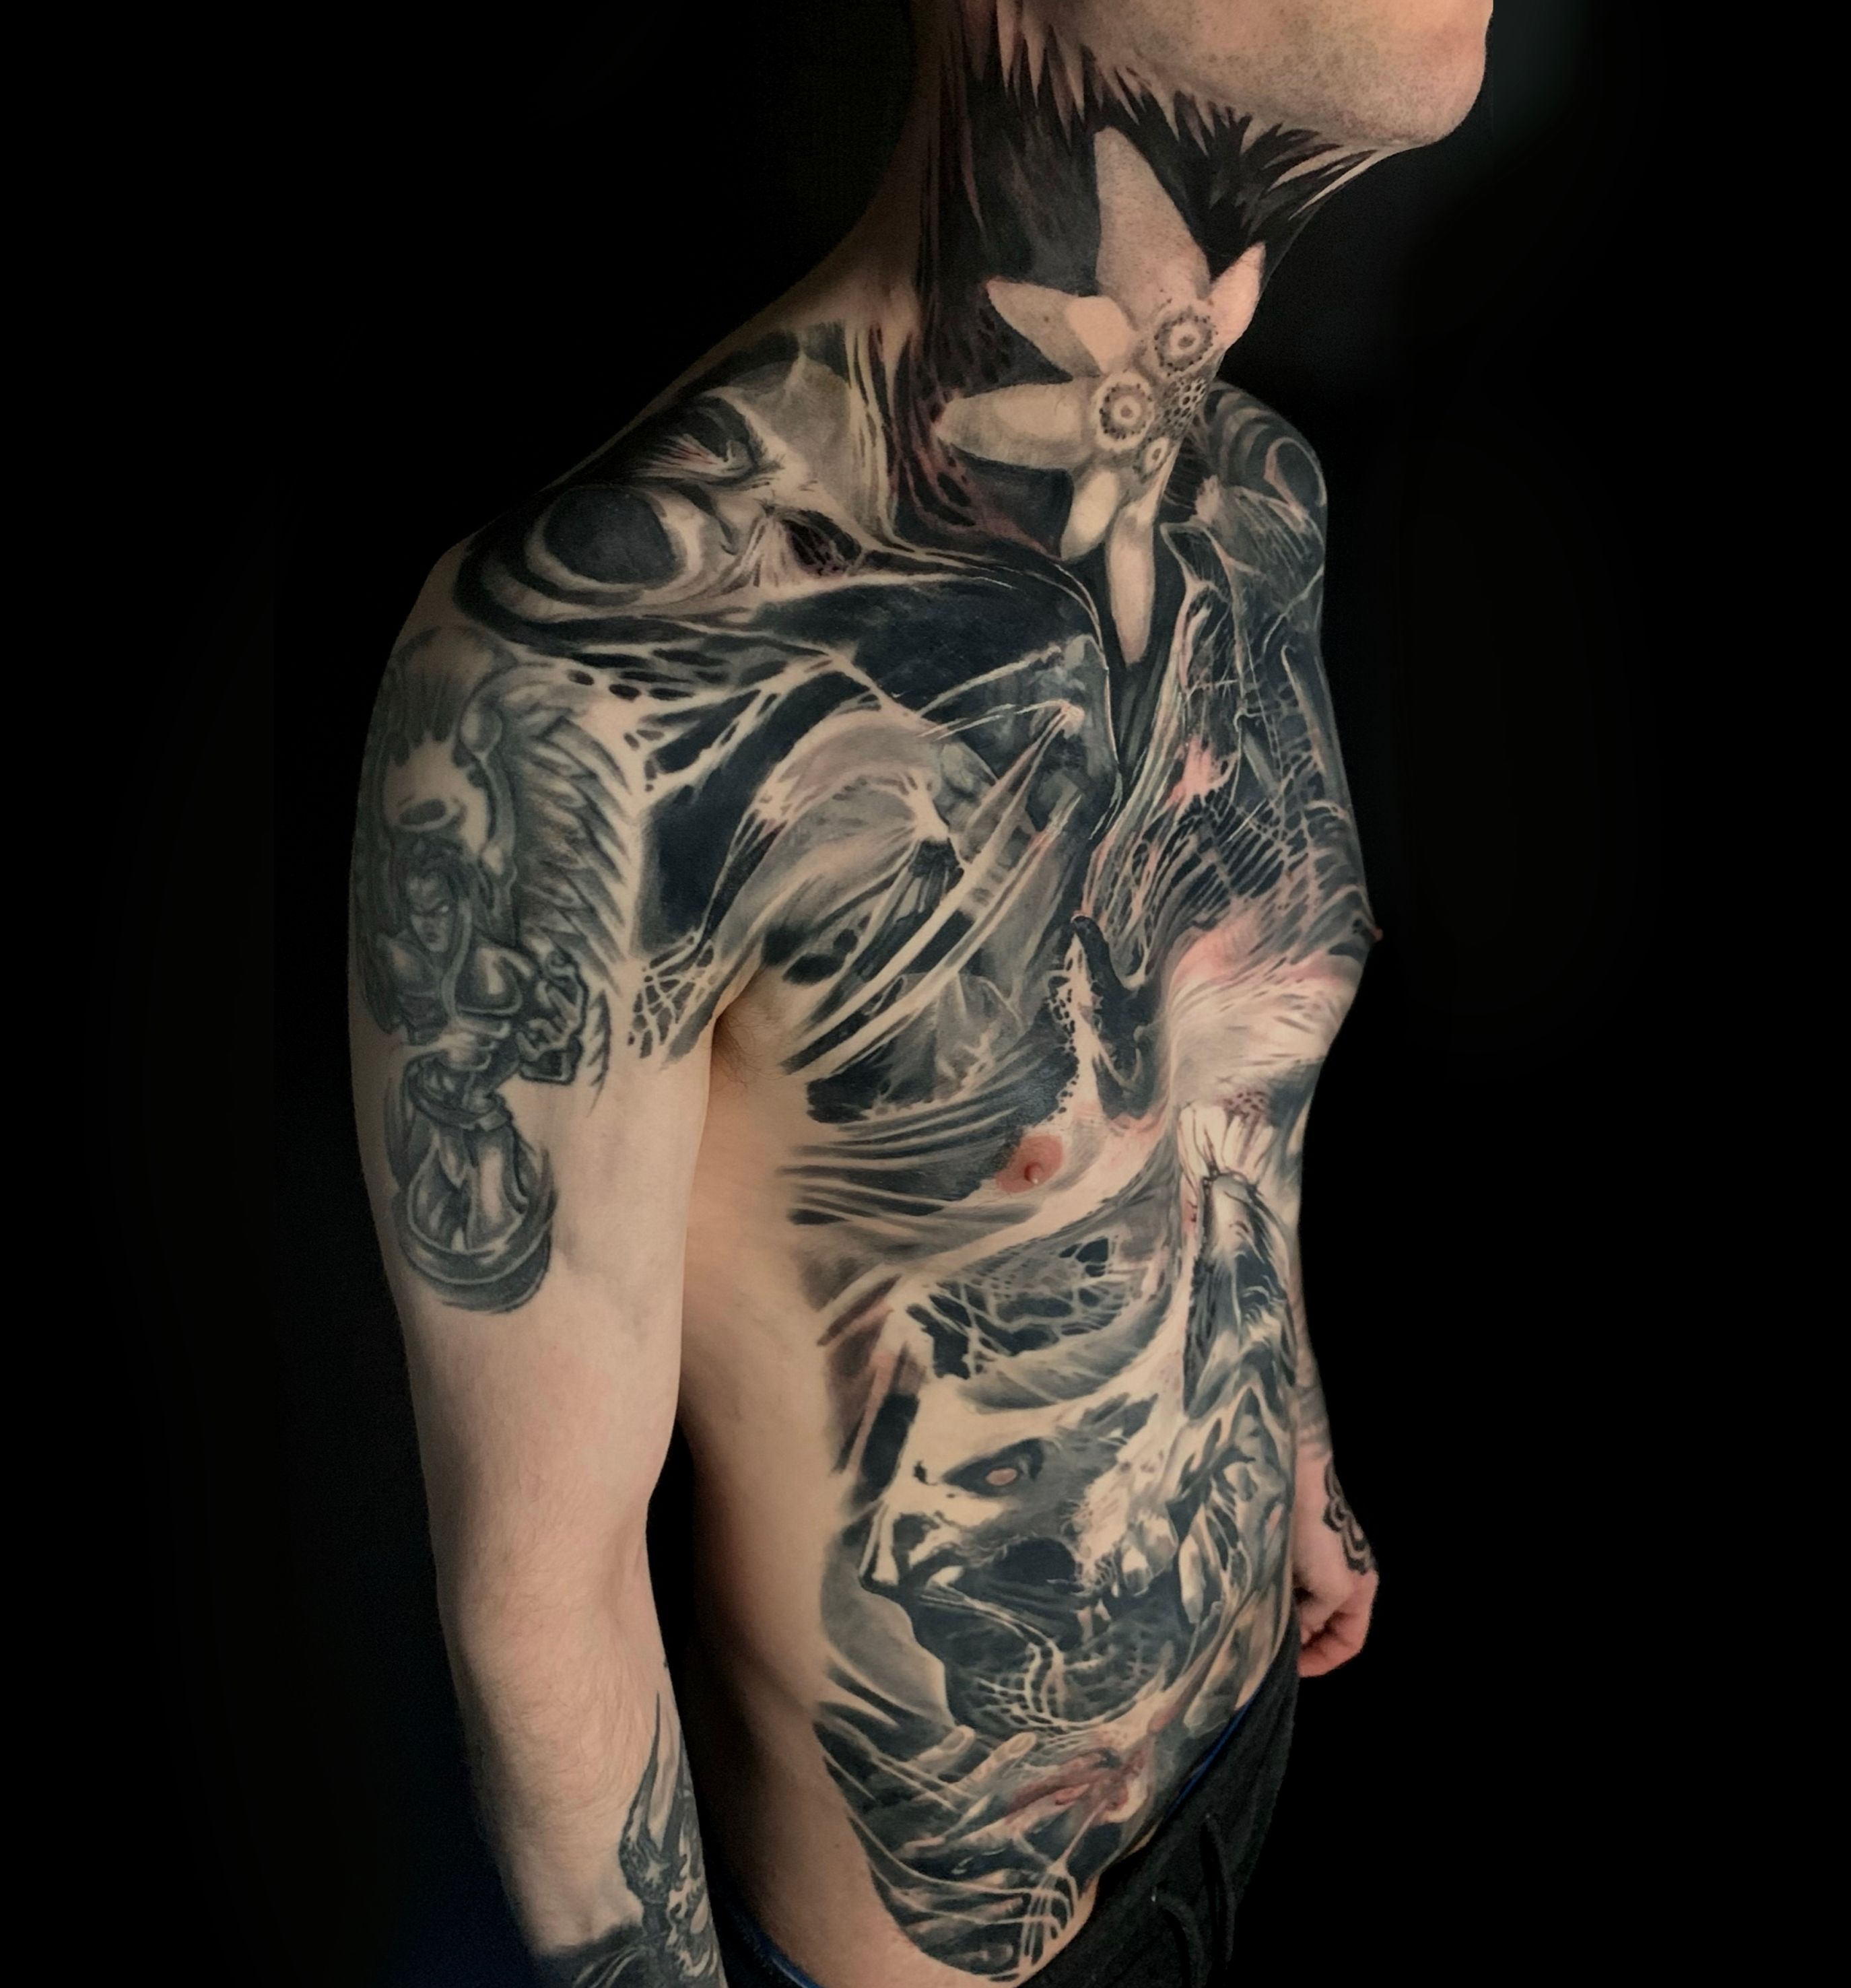 What do you think about girls with neck tattoos? - GirlsAskGuys